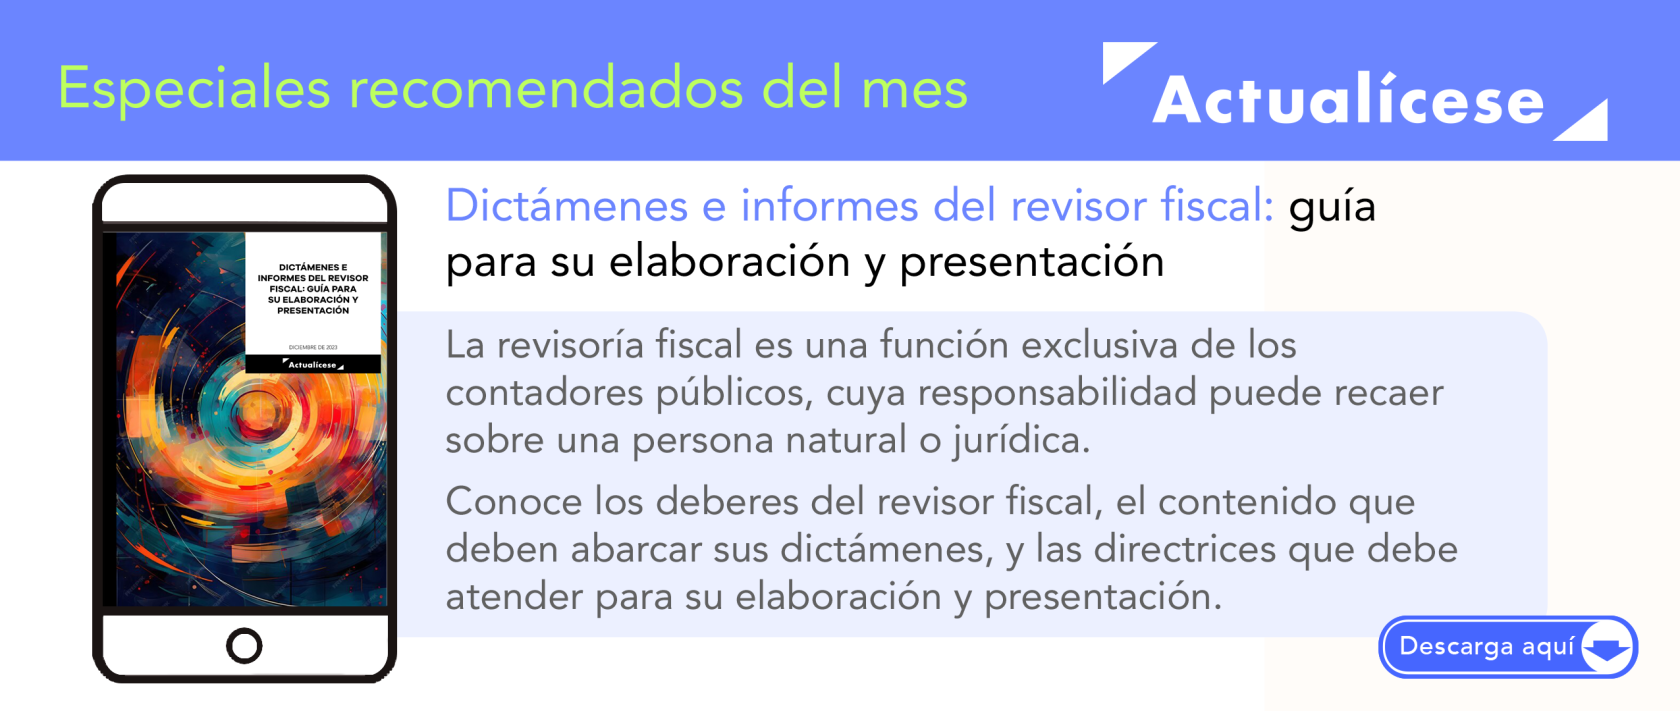 Especiales actualicese 1-4.png